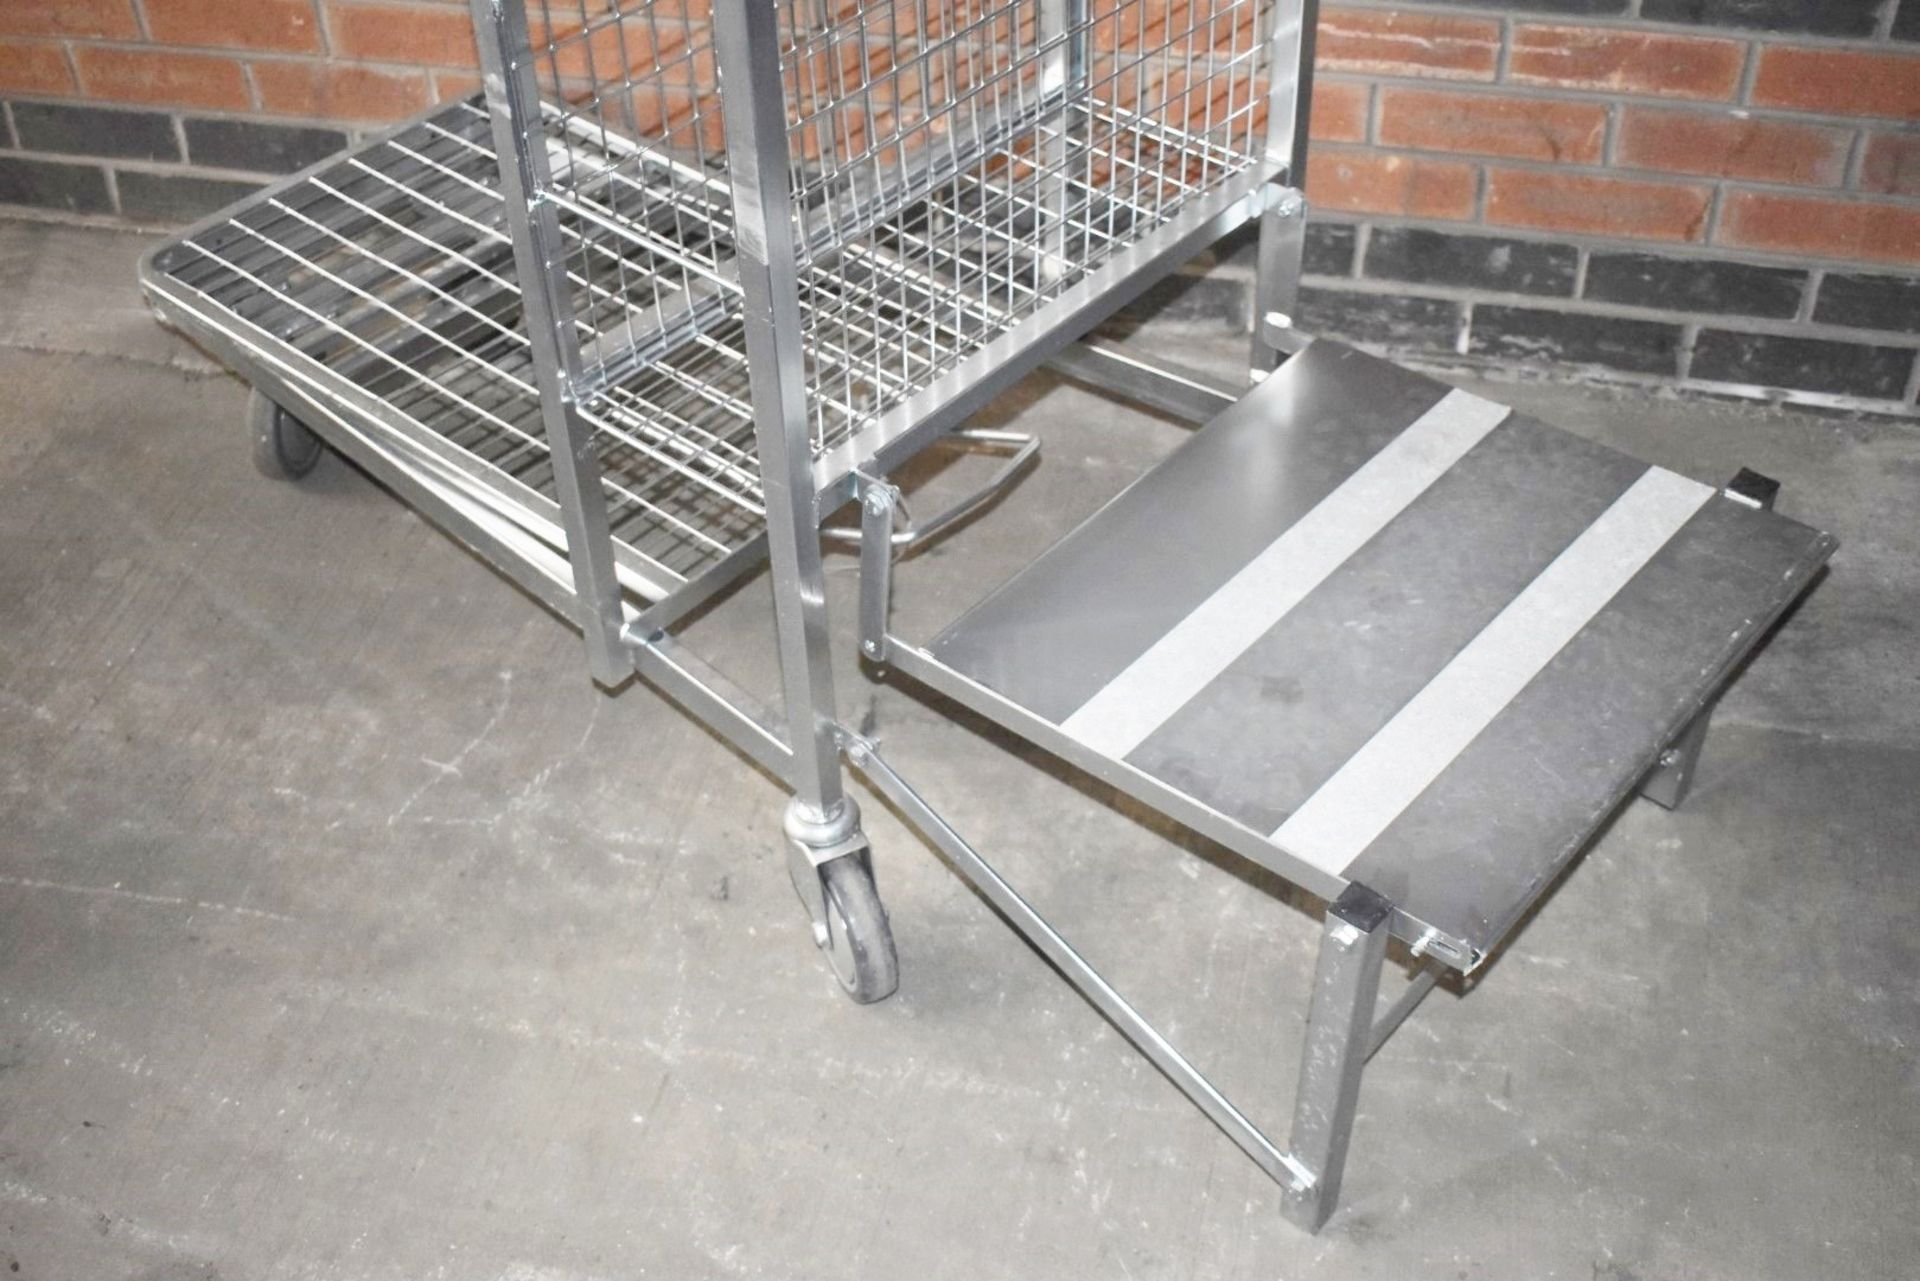 1 x Supermarket Retail Merchandising Trolley With Pull Out Step and Folding Shelf - Dimensions: - Image 7 of 9